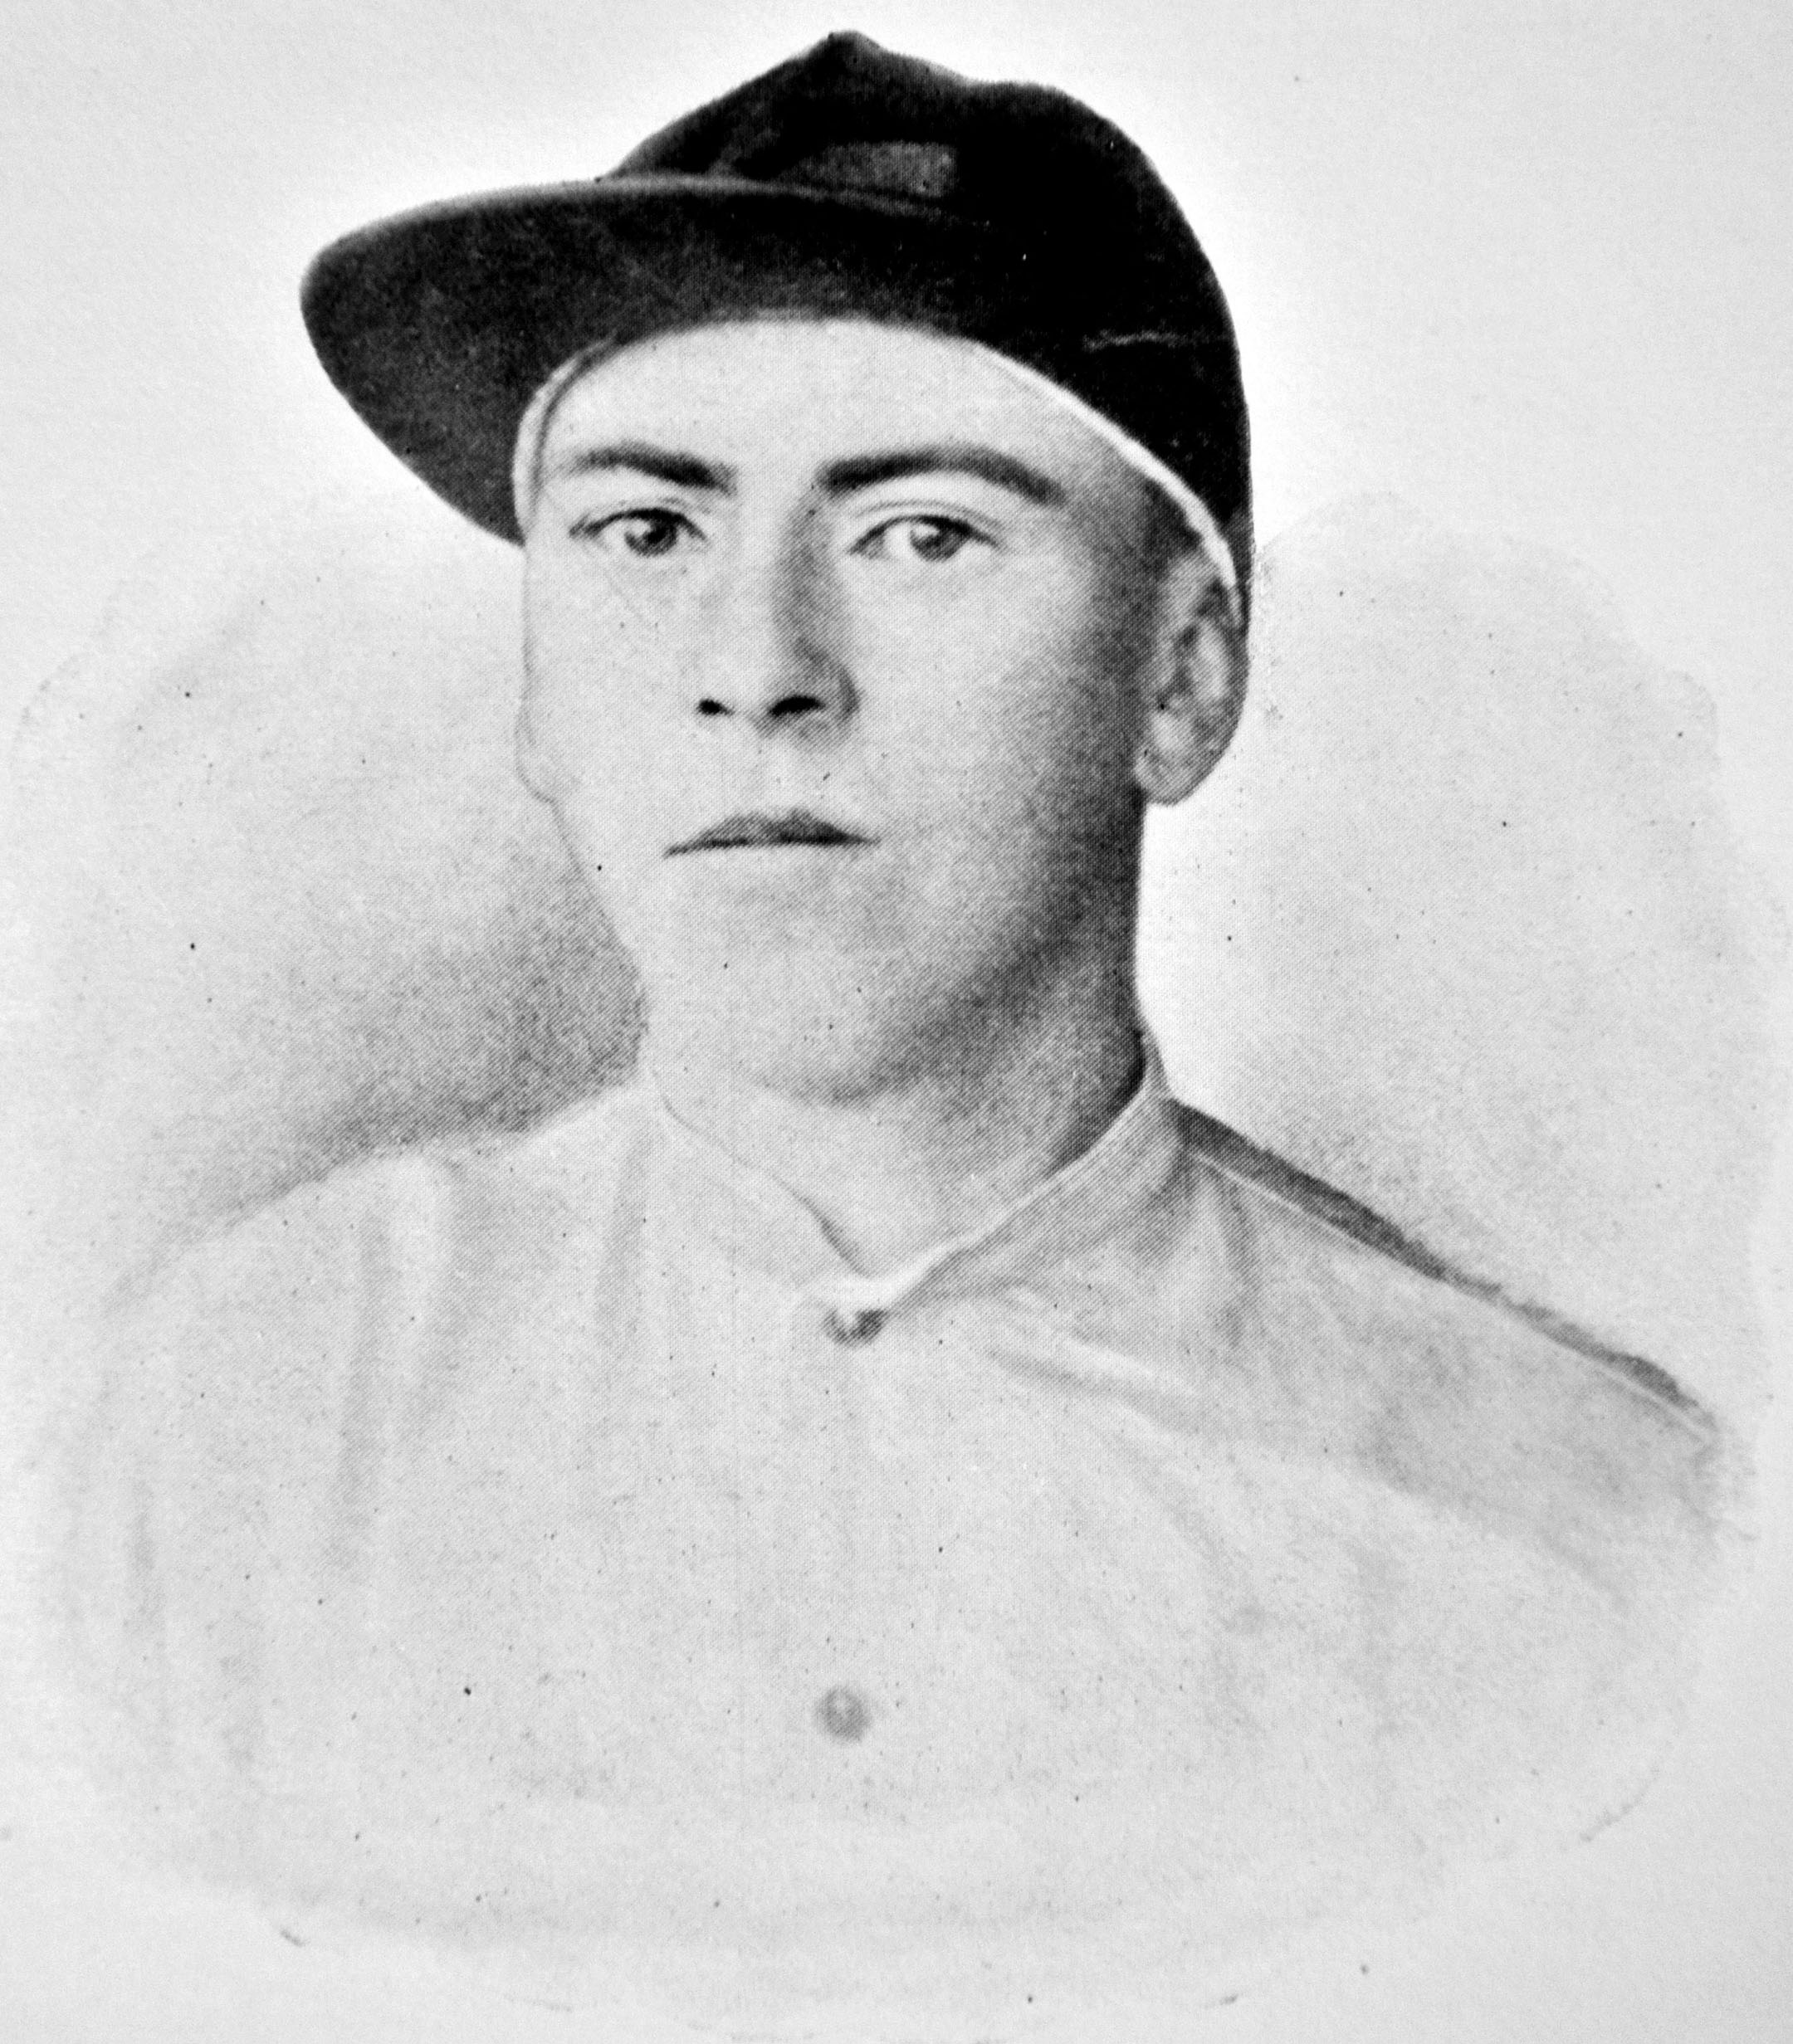 Photograph of jockey Lloyd Hughes from The American Turf (Museum Collection)